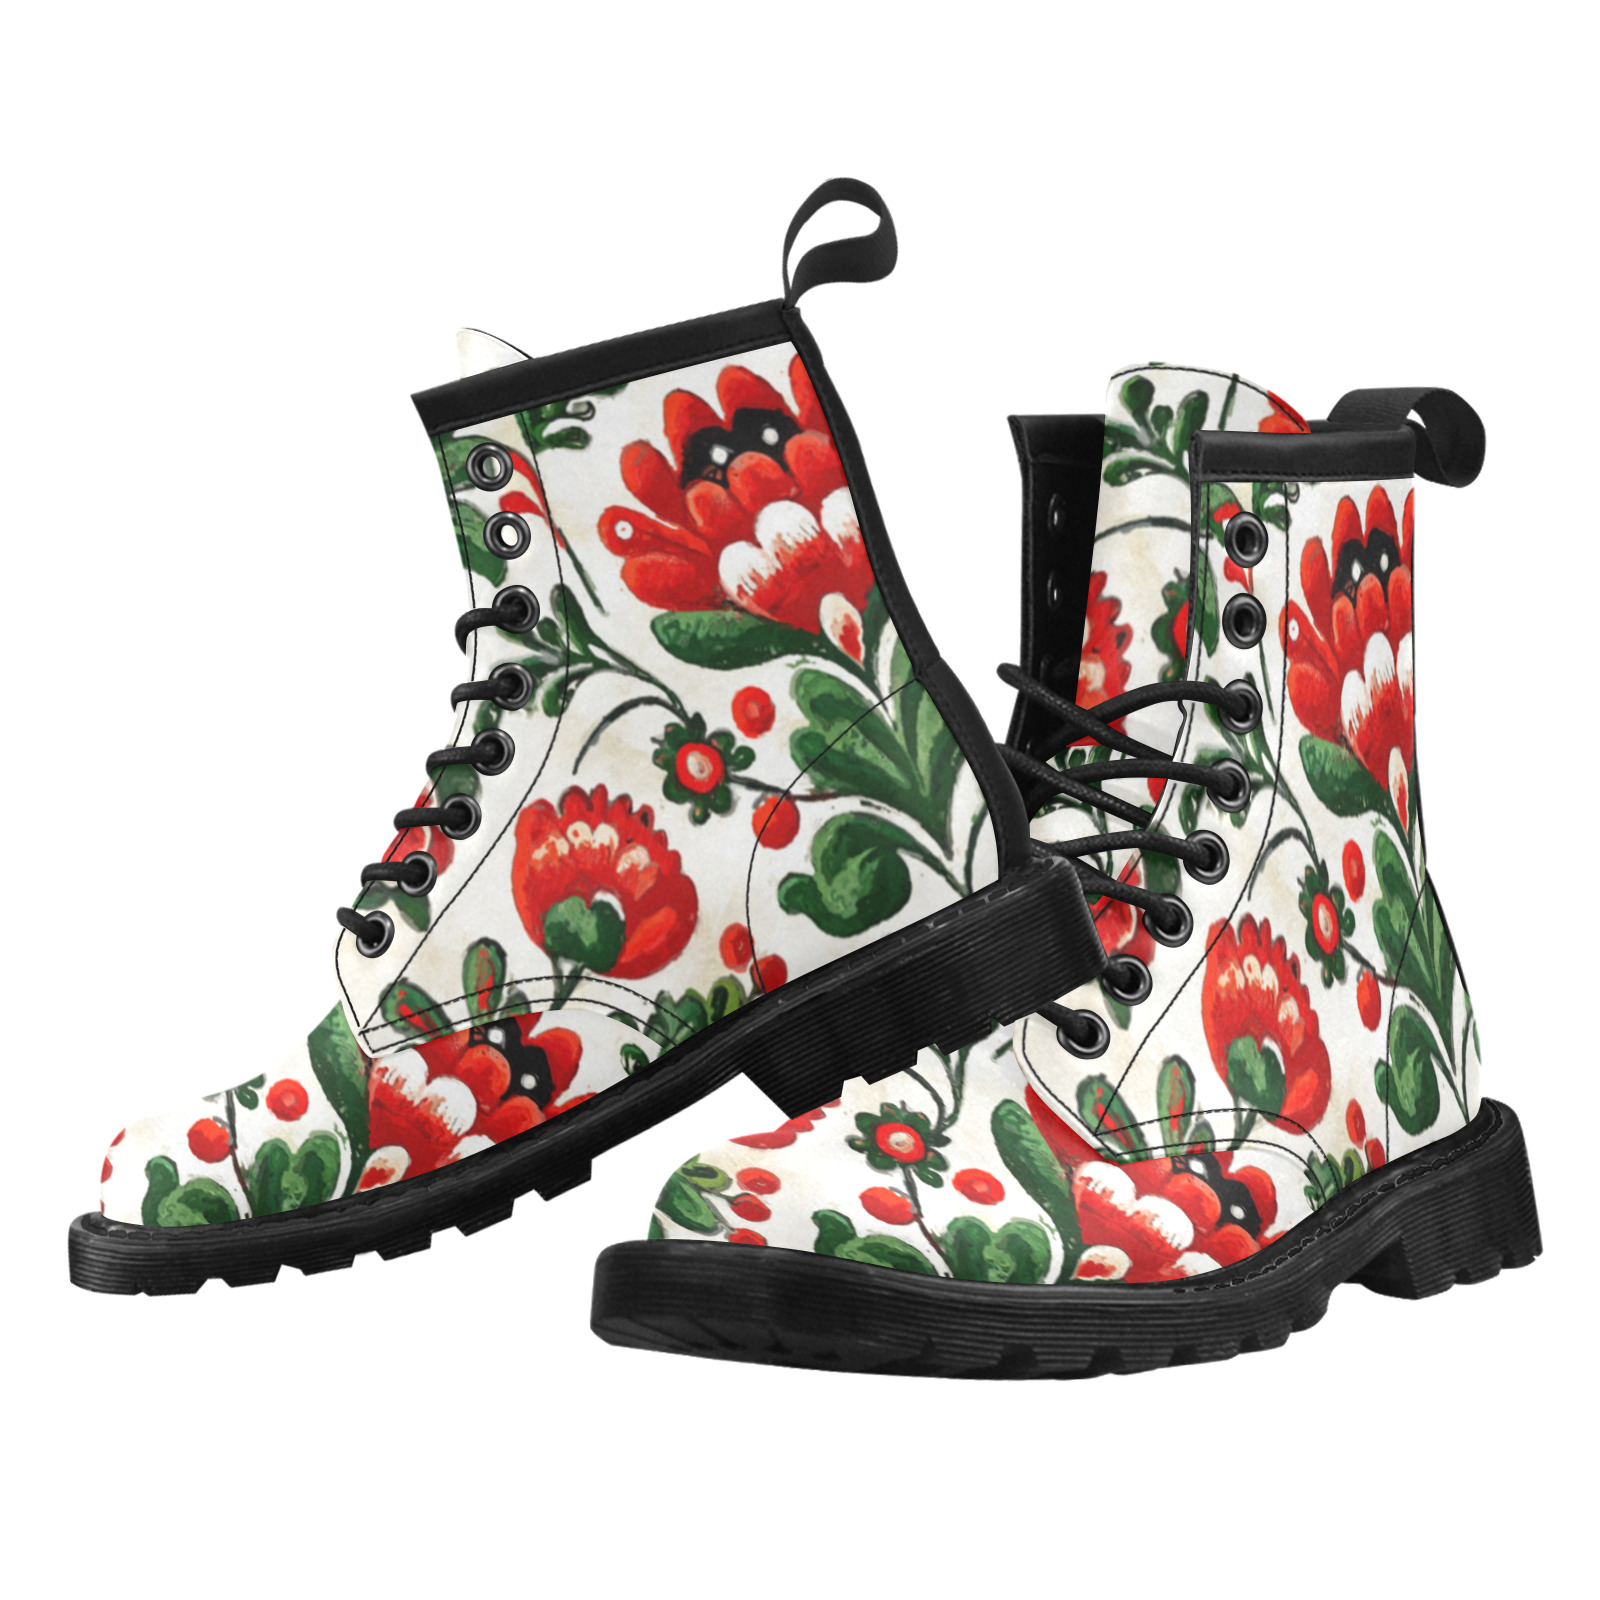 folklore motifs red flowers Women's PU Leather Martin Boots (Model 402H)